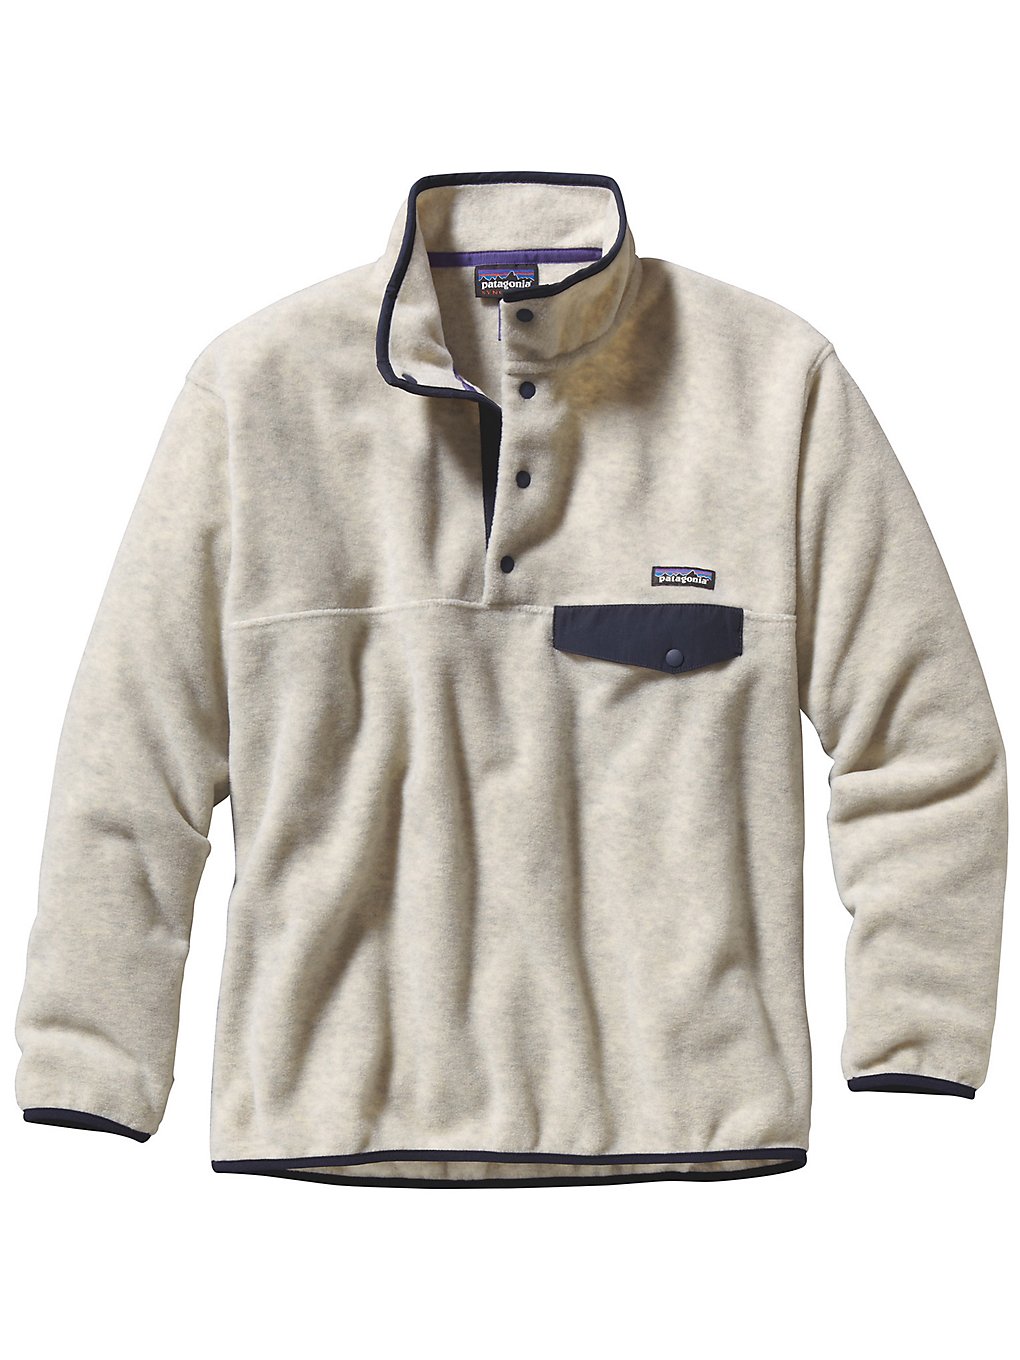 Patagonia Synch Snap-T Fleece Pullover oatmeal heather kaufen